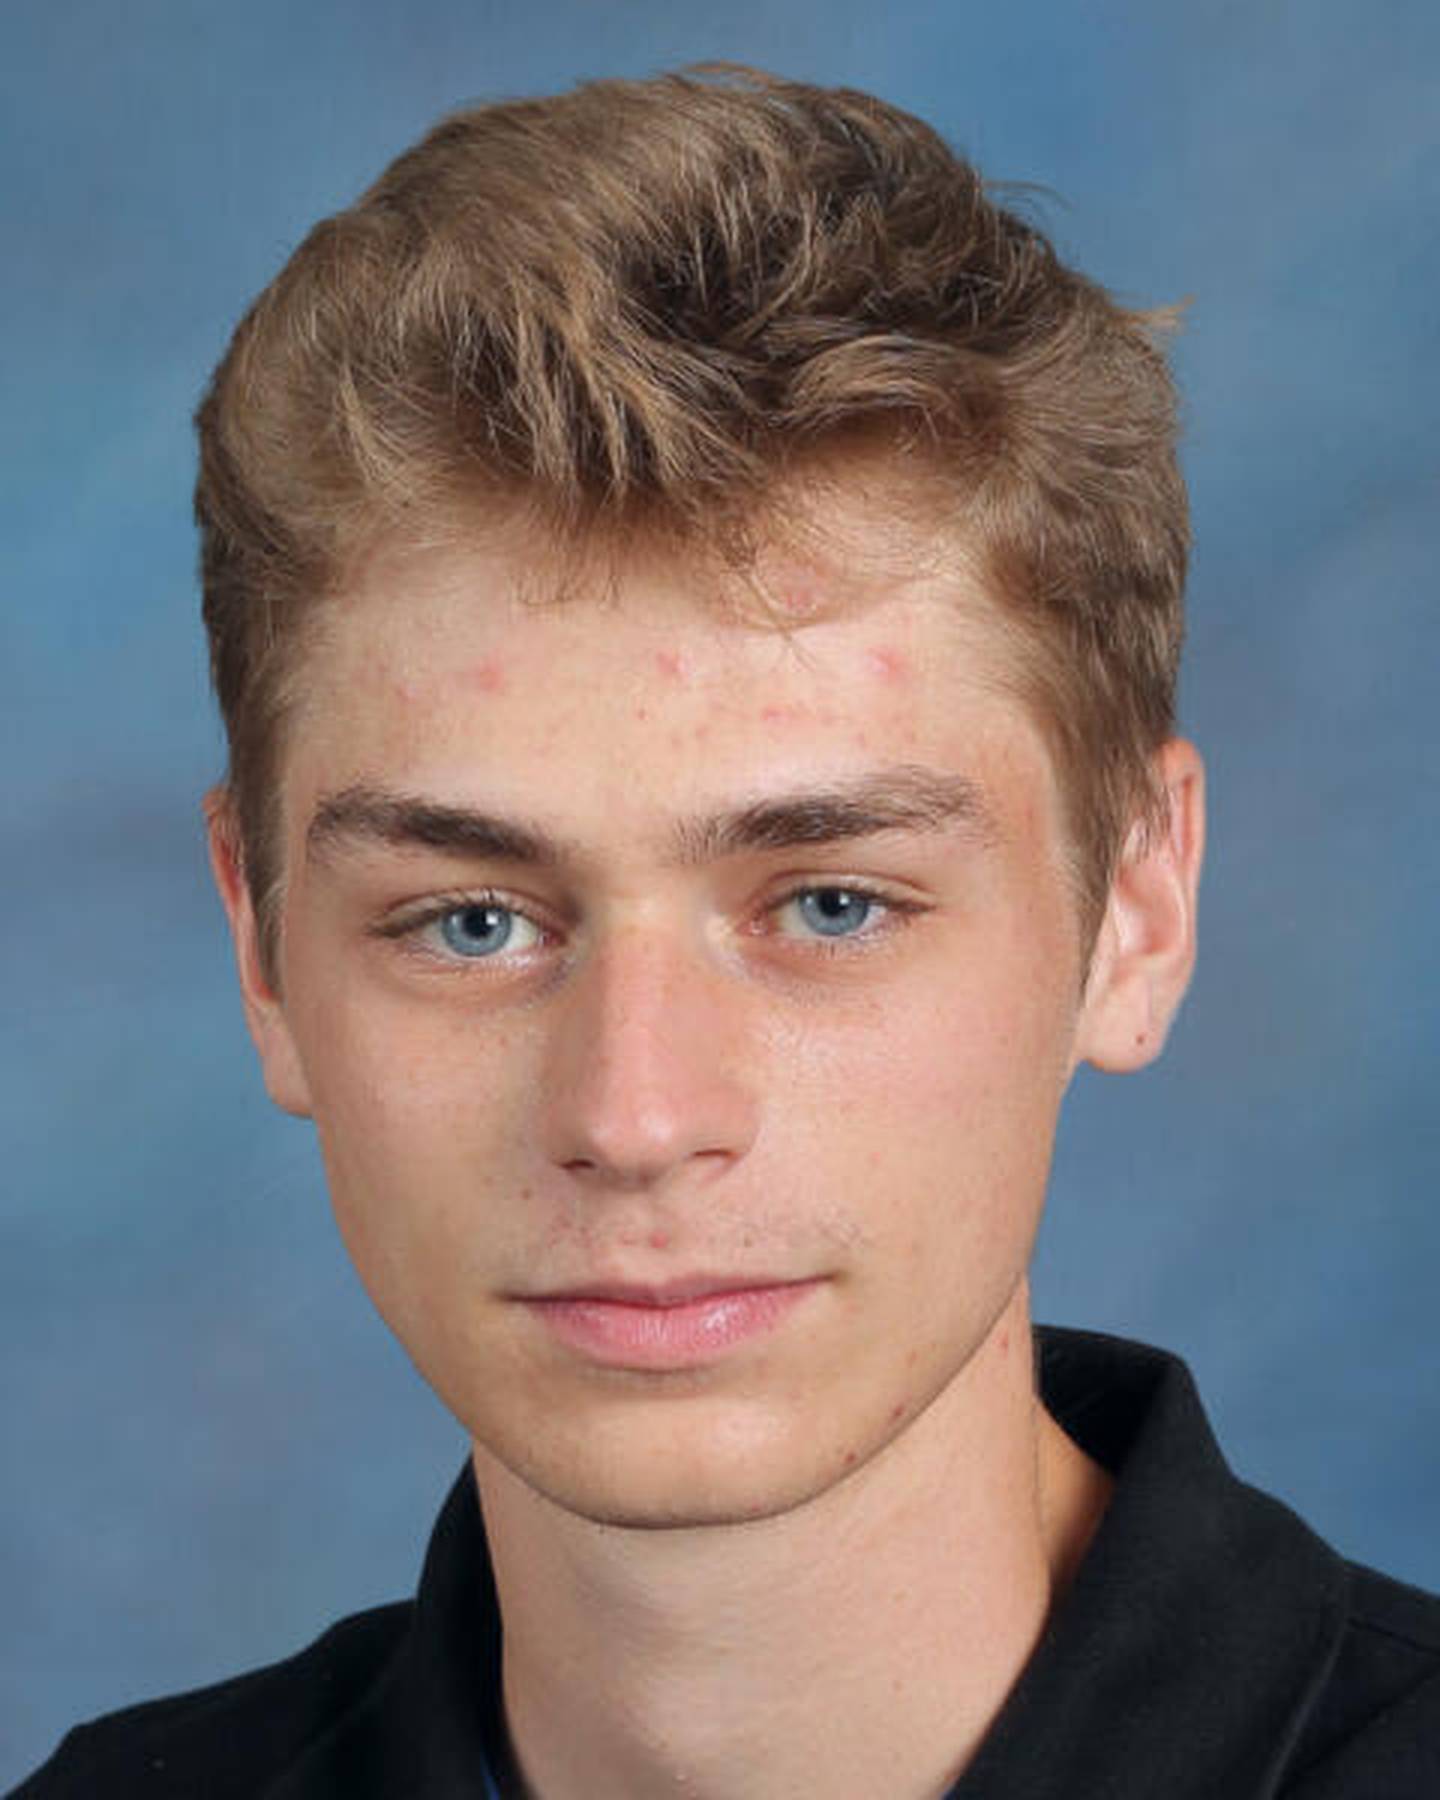 Joliet Catholic Academy named Andrew Ciarlette as a Student of the Month for December 2021.